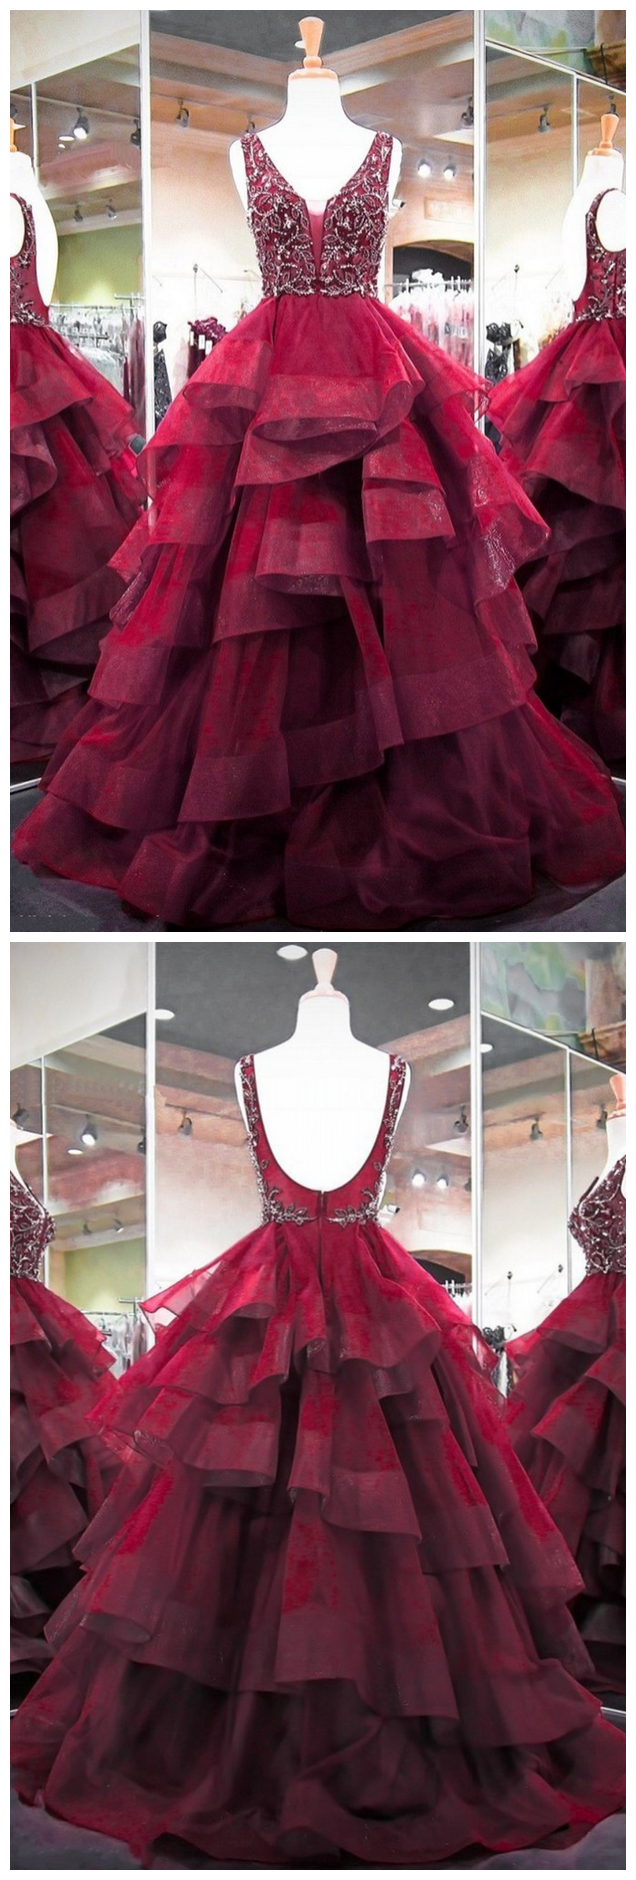 Burgundy Beaded Prom Dresses Ball Gown Pageant Dresses For Women V Neck Tiered Elegant Sleeveless Prom Gowns 2021